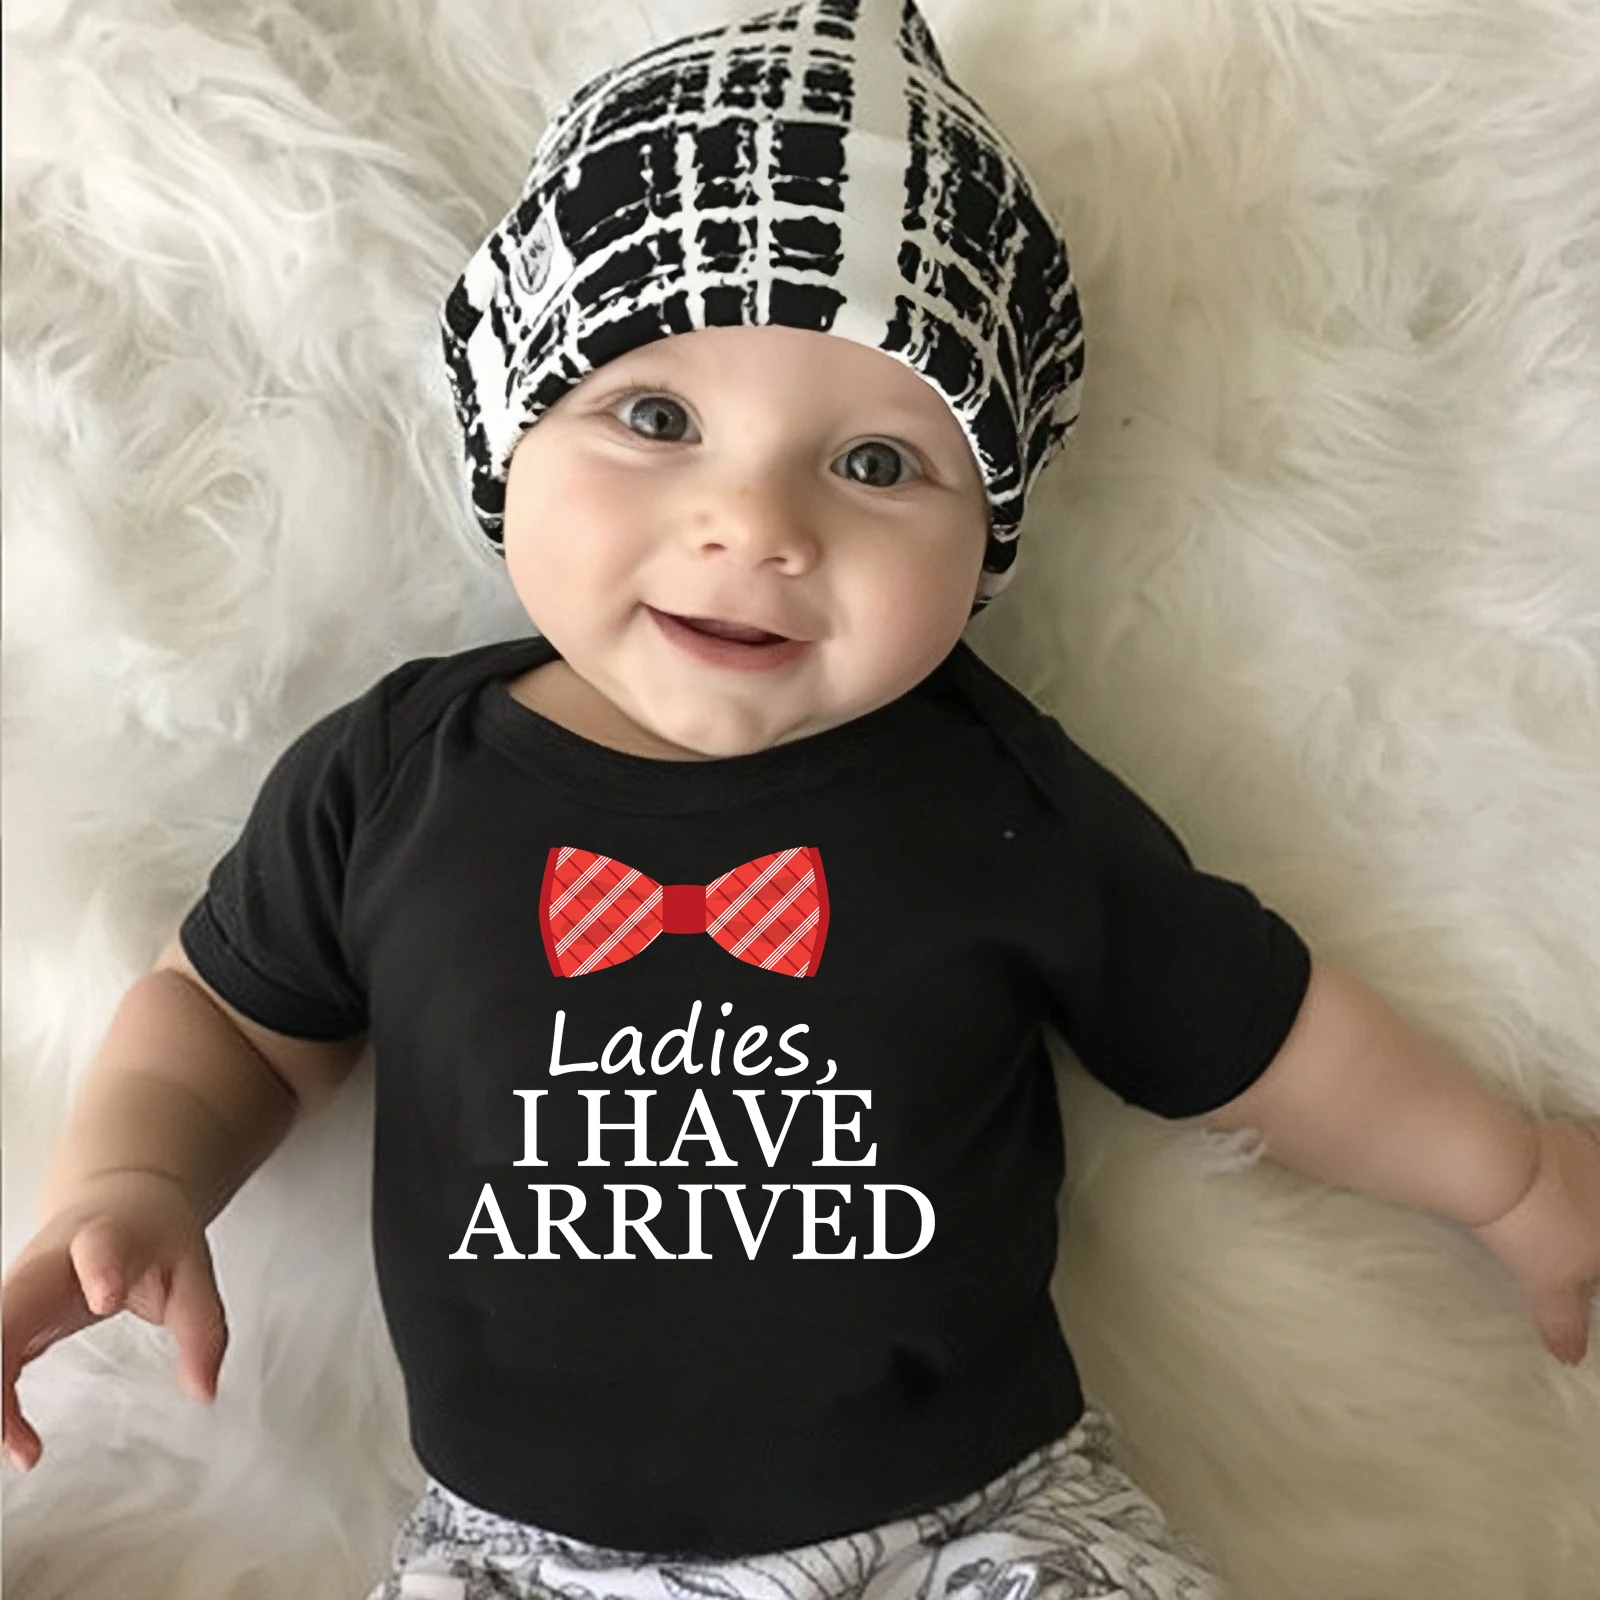 

Ladies I Have Arrived Infant Bodysuits Funny Baby Romper Cotton Jumpsuit Outfits Onesies Short Sleeve Boys Girls Clothes